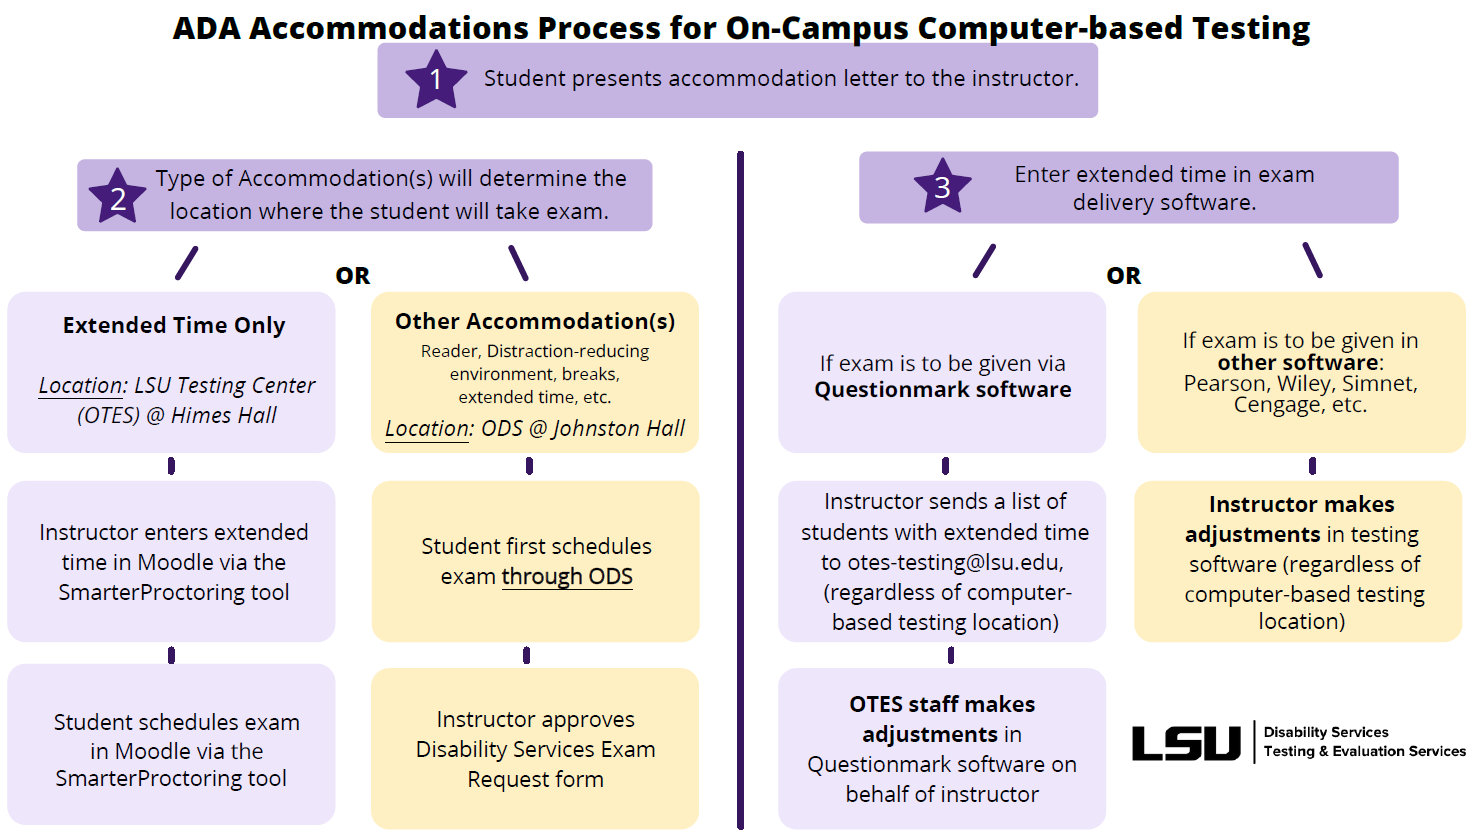 Sample Image of Accommodations Flow Chart - Click for PDF